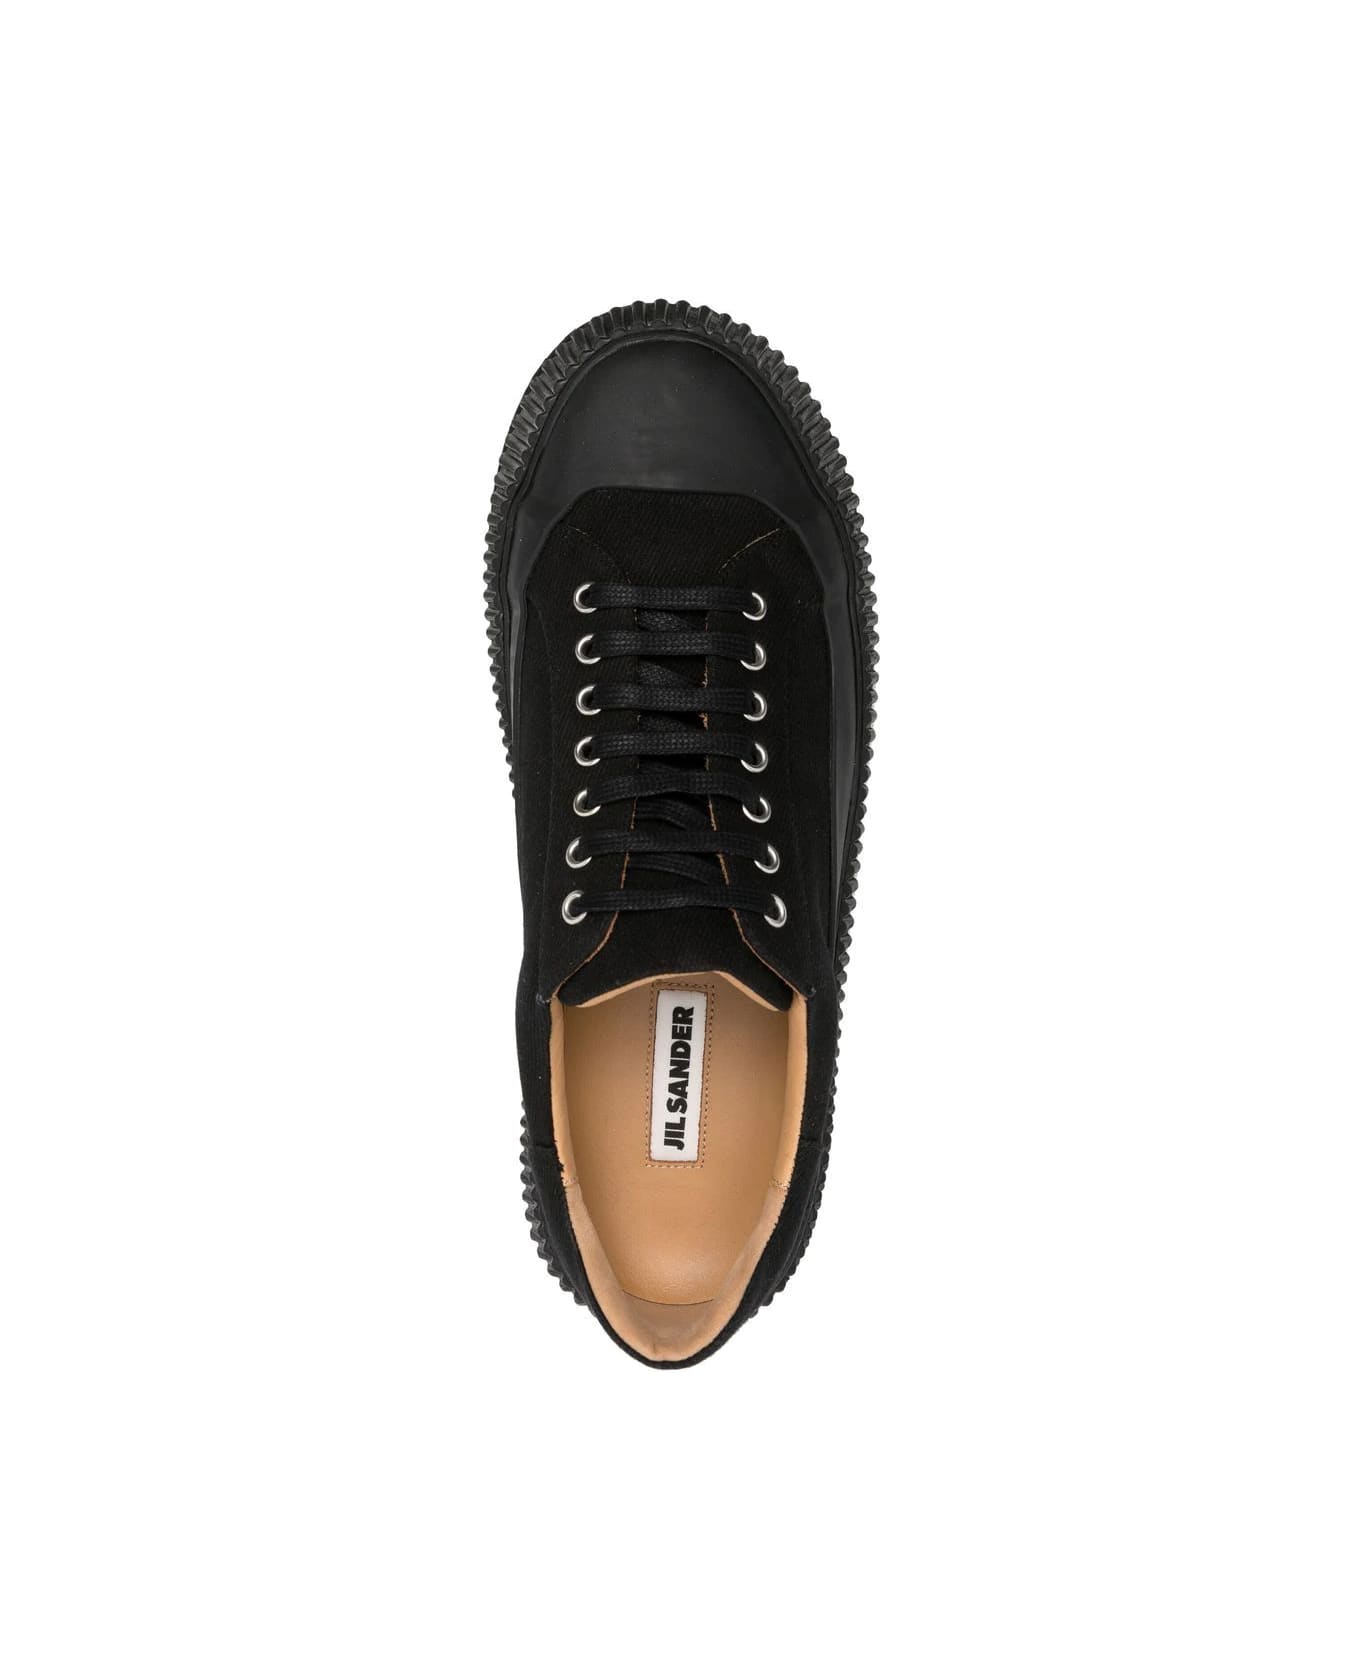 Jil Sander Low Laced Sneakers With Vulcanized Rubber Sole - Black スニーカー